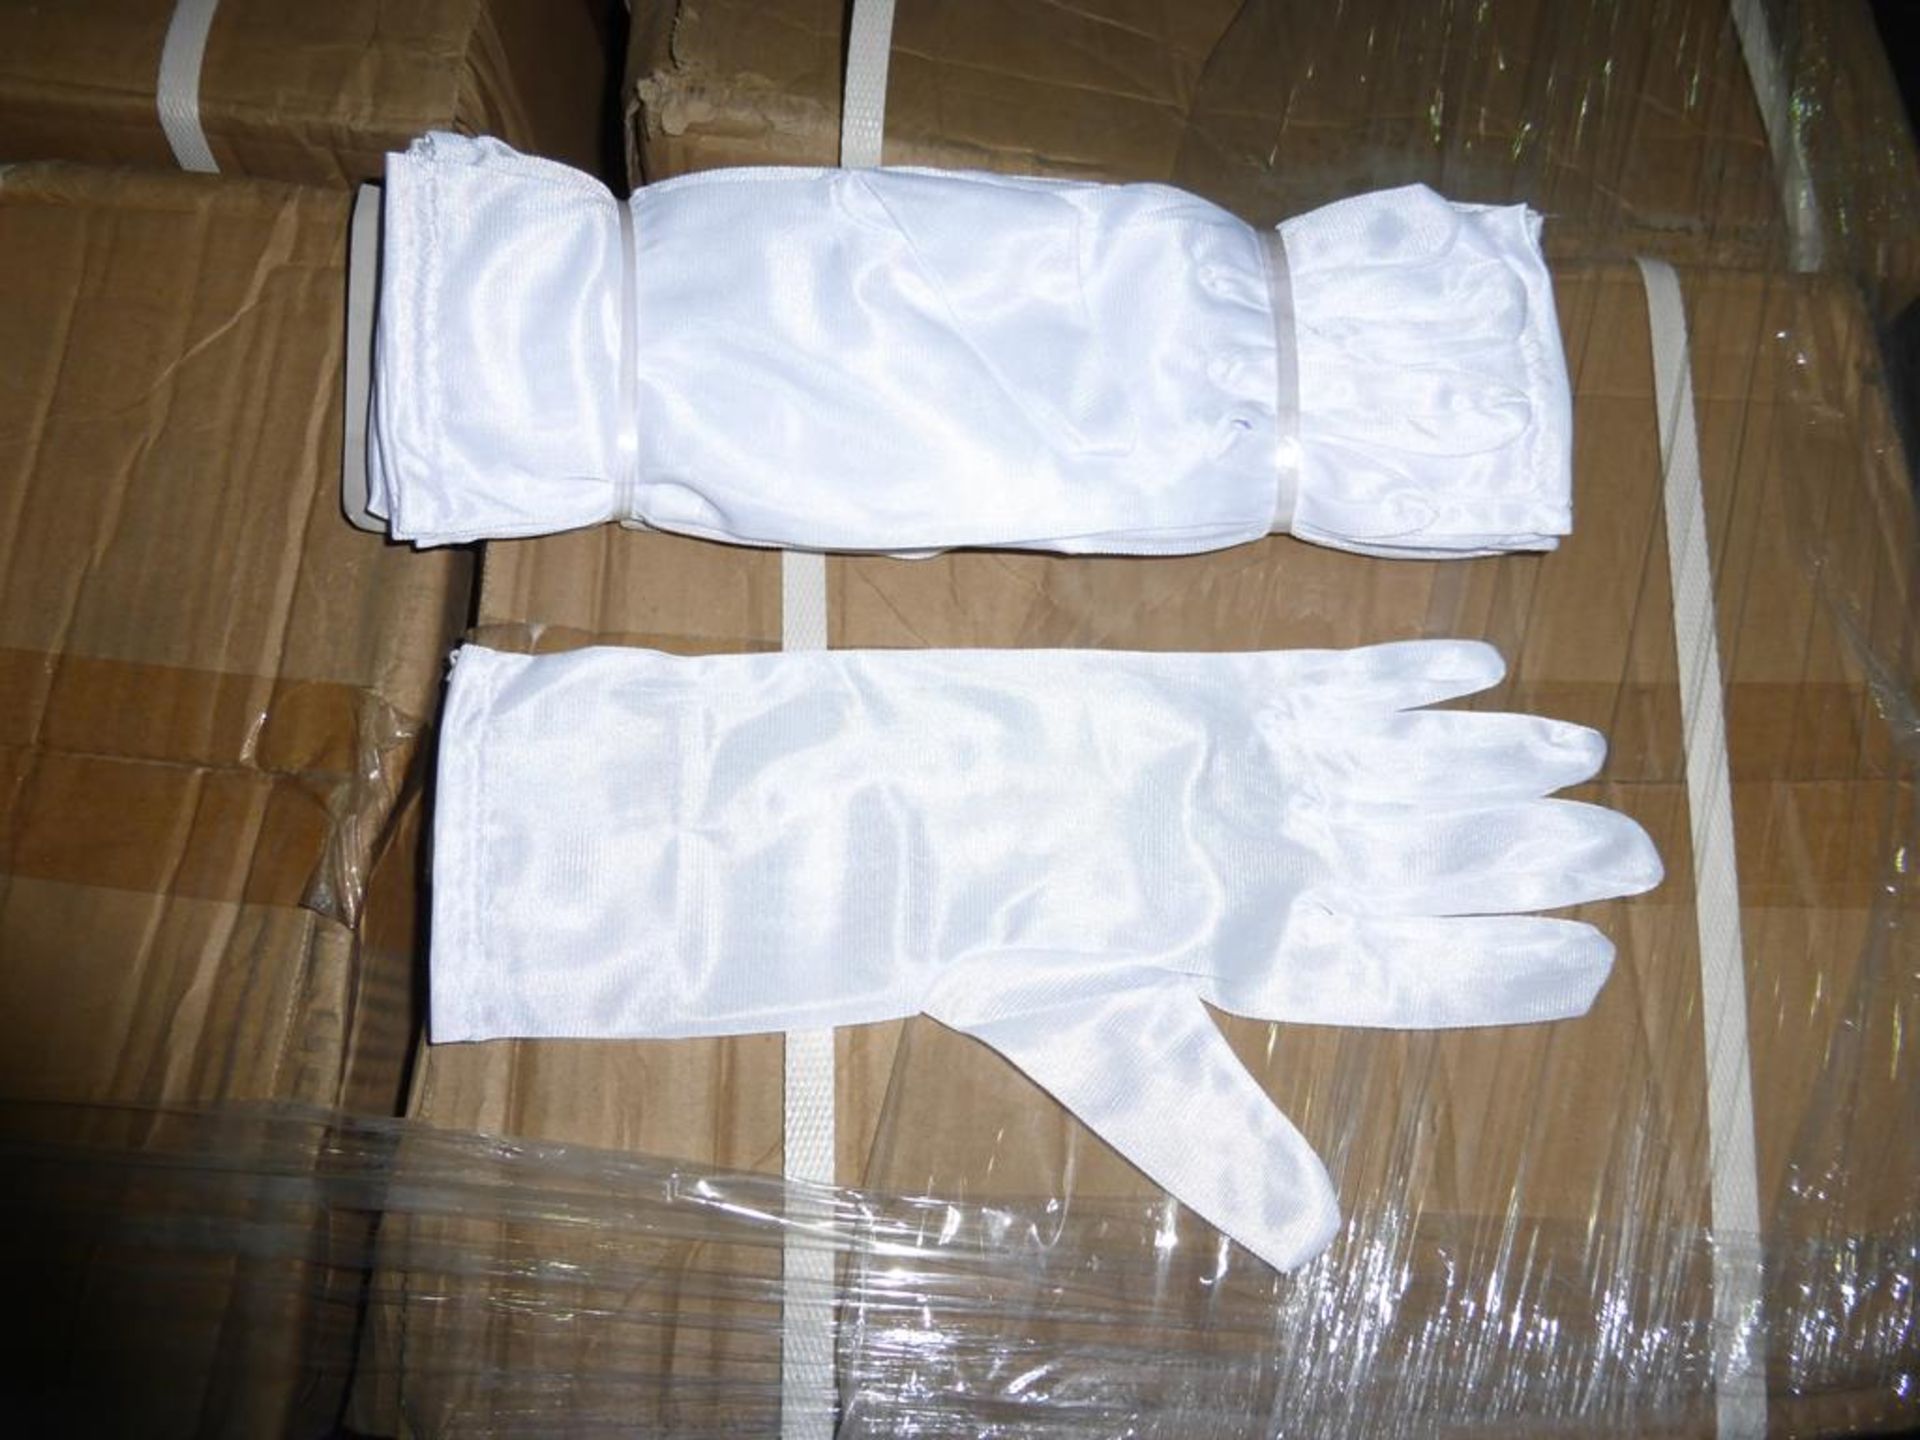 10800 Pairs (18 Boxes) 12" 500 Denier XL Gloves - Image 2 of 2